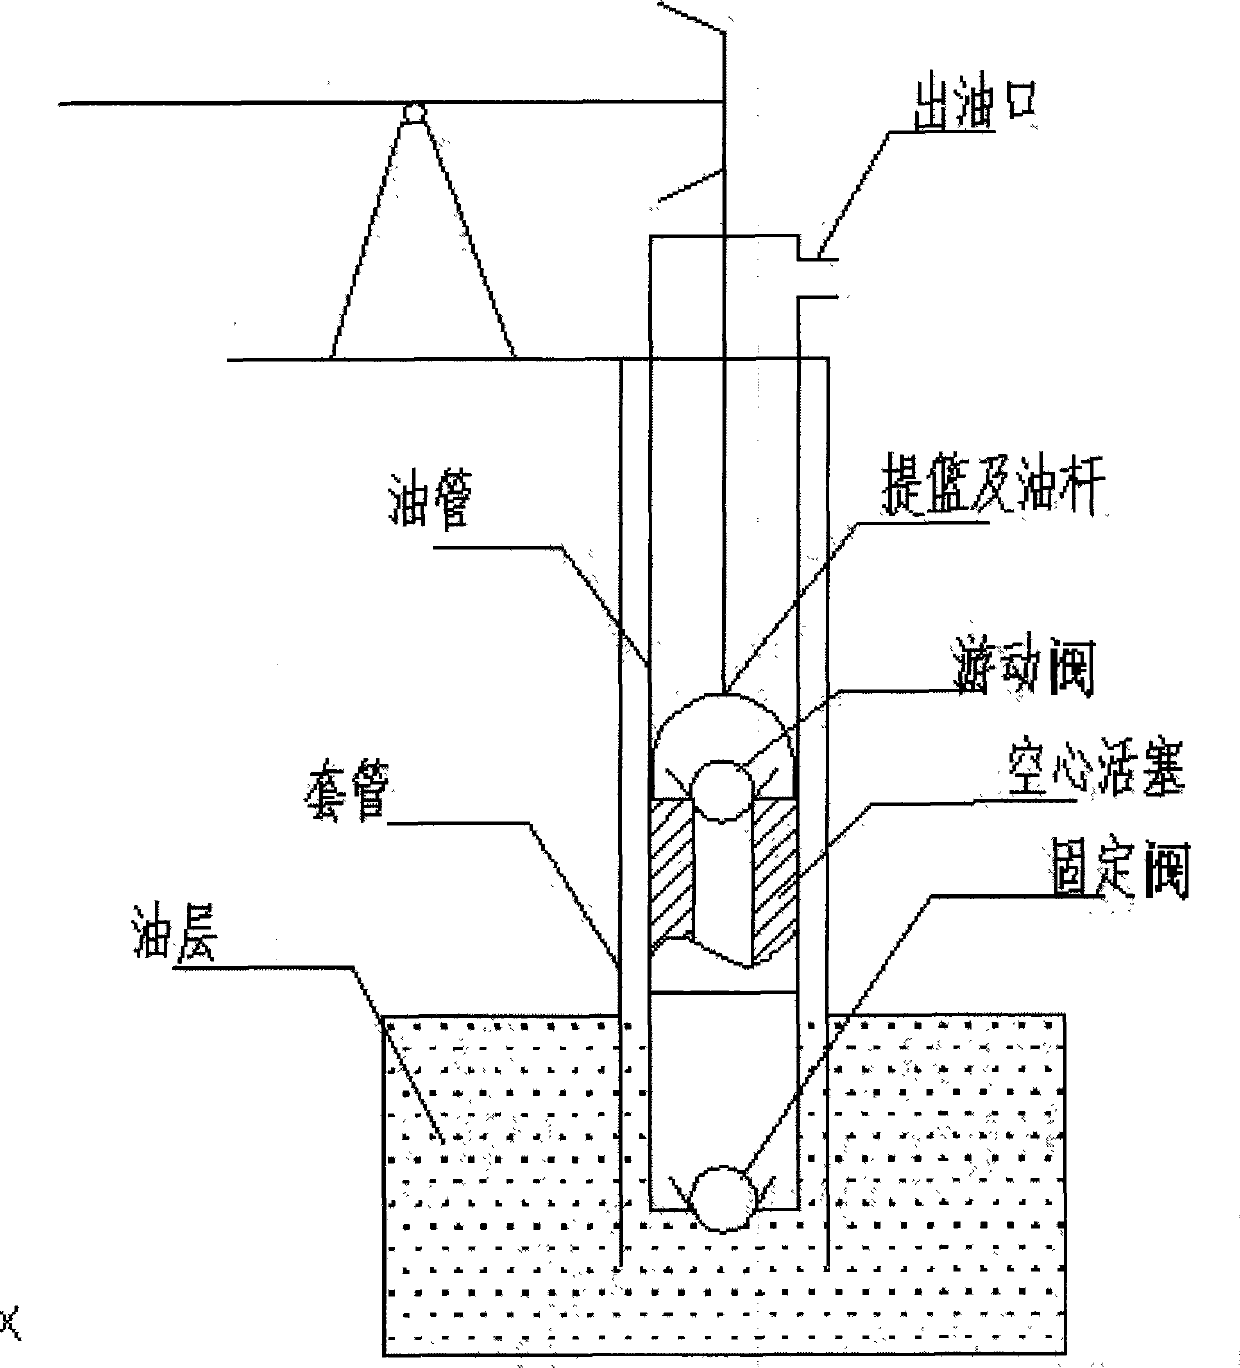 Pumping well wellhead oil charging device with ZYQ buffer